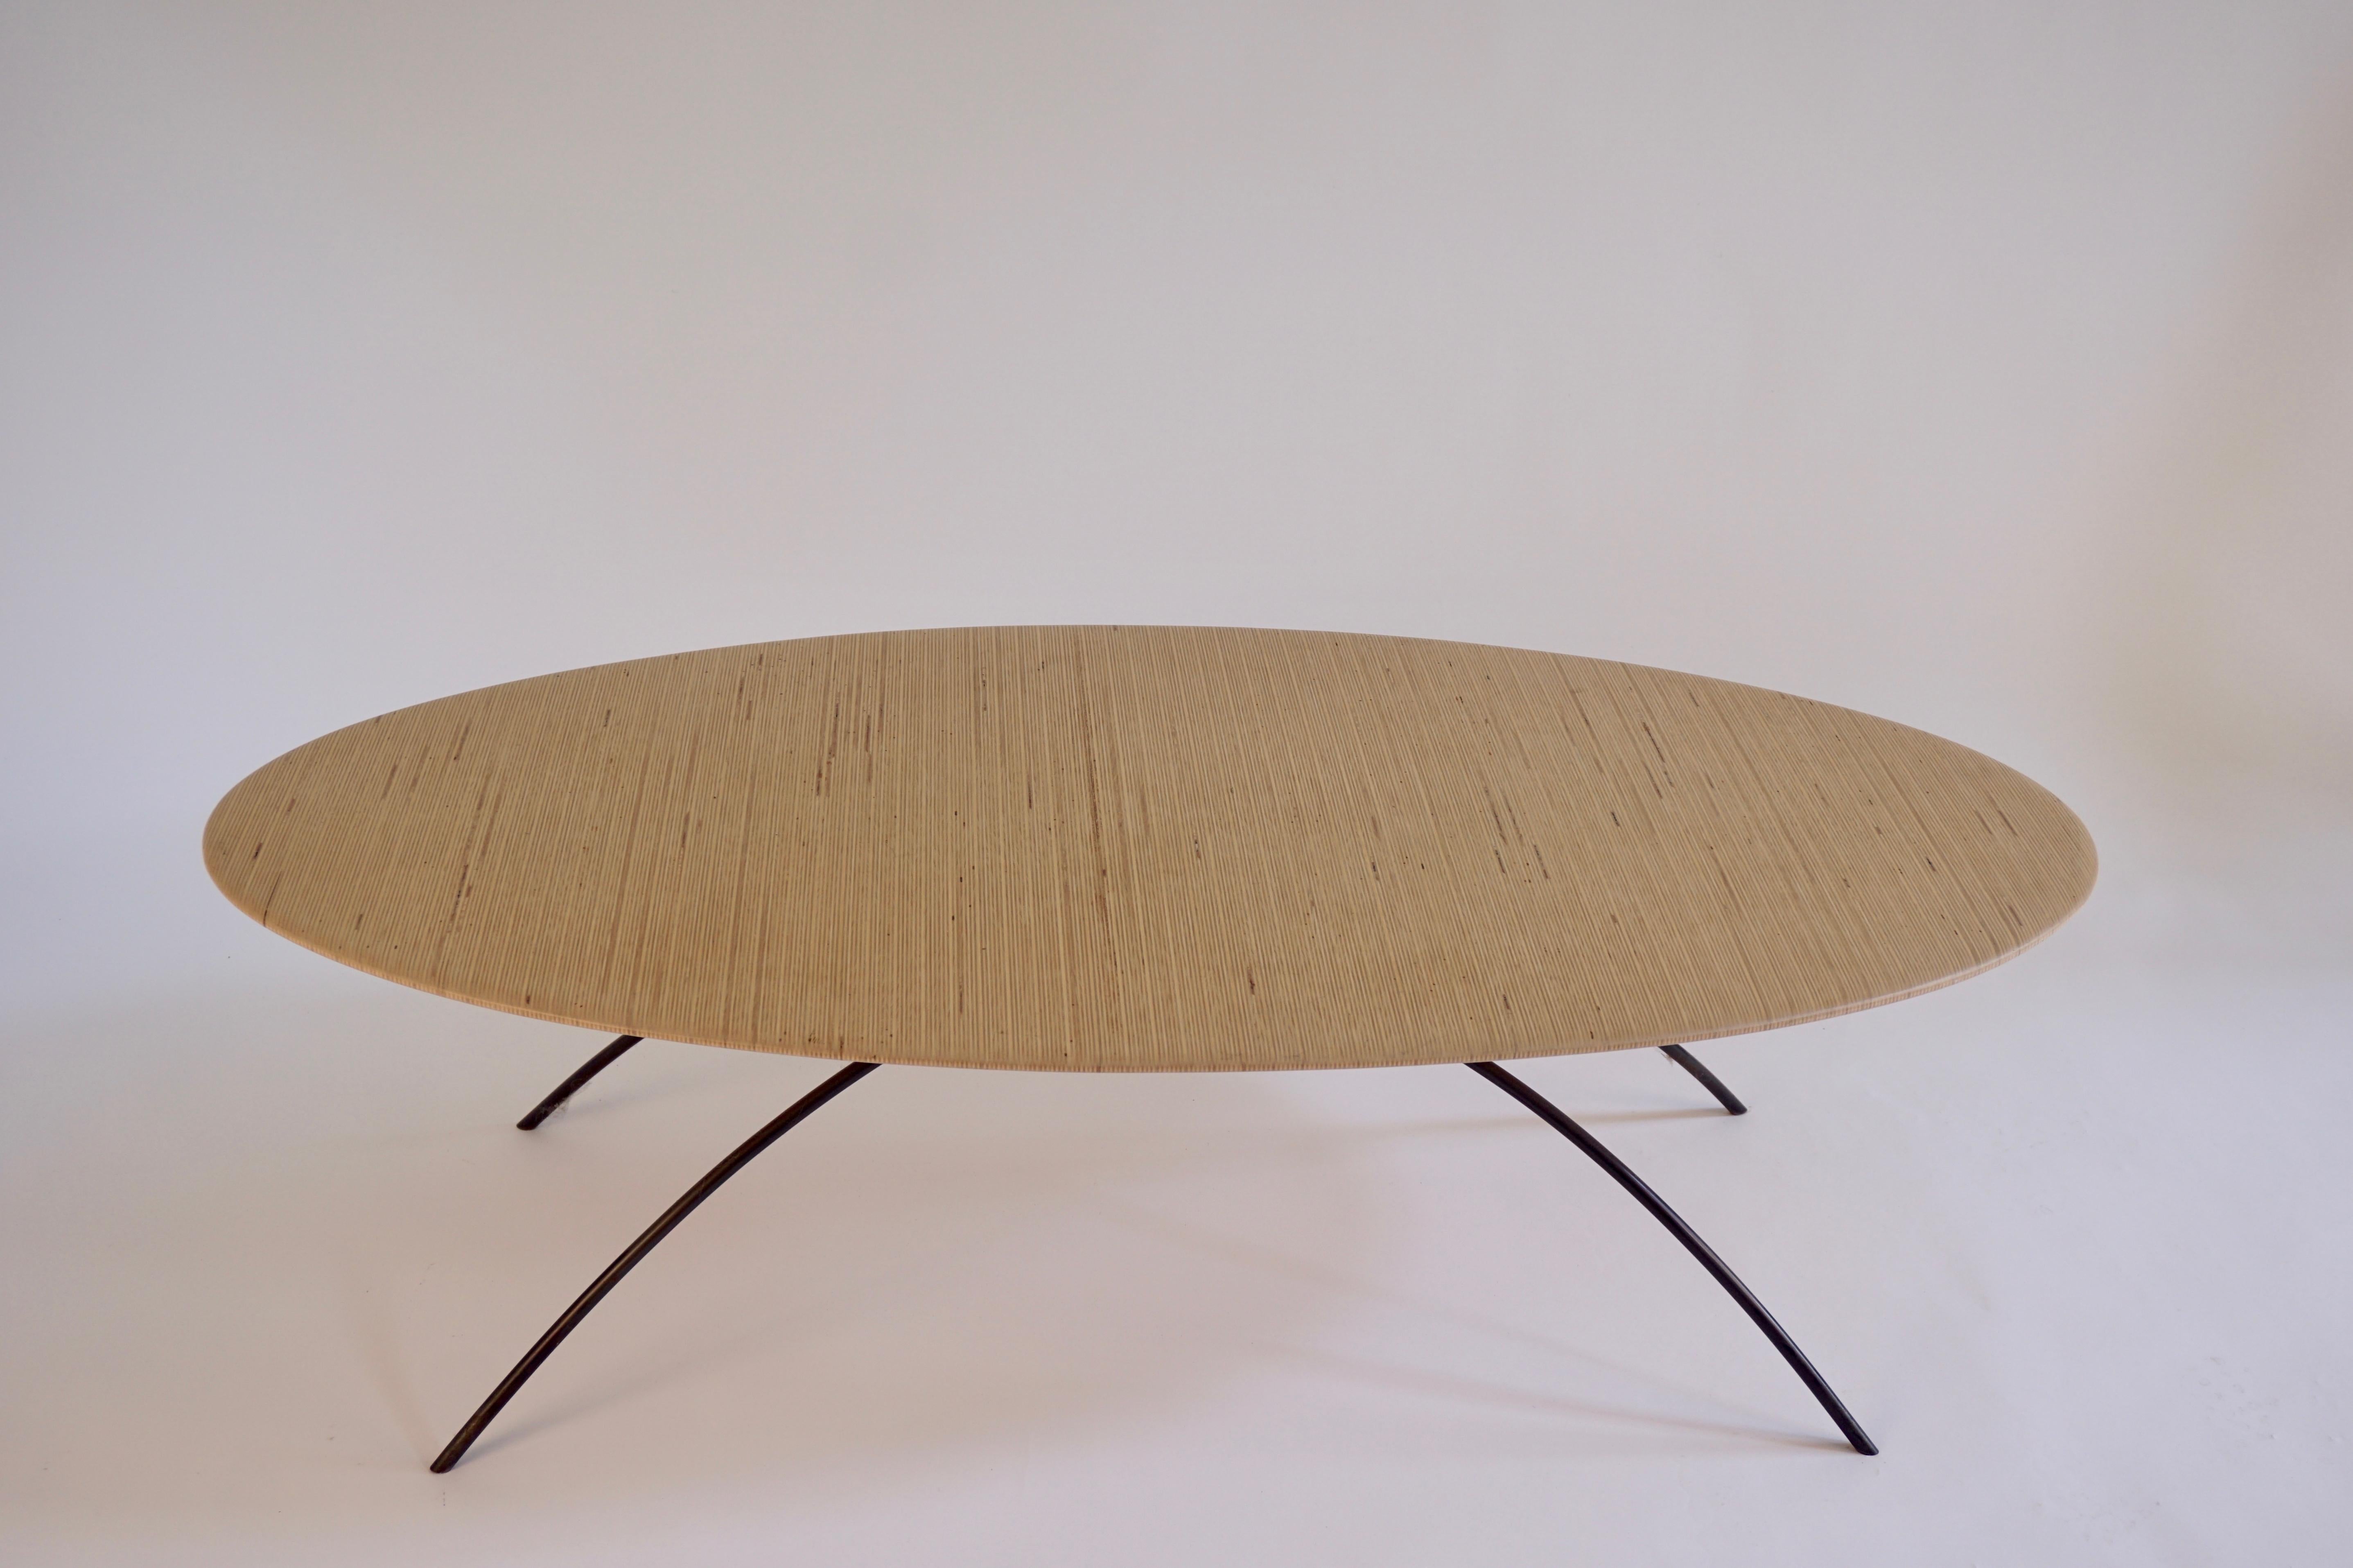 American Sculpted Oval Coffee Table, Laminated Finnland Plywood